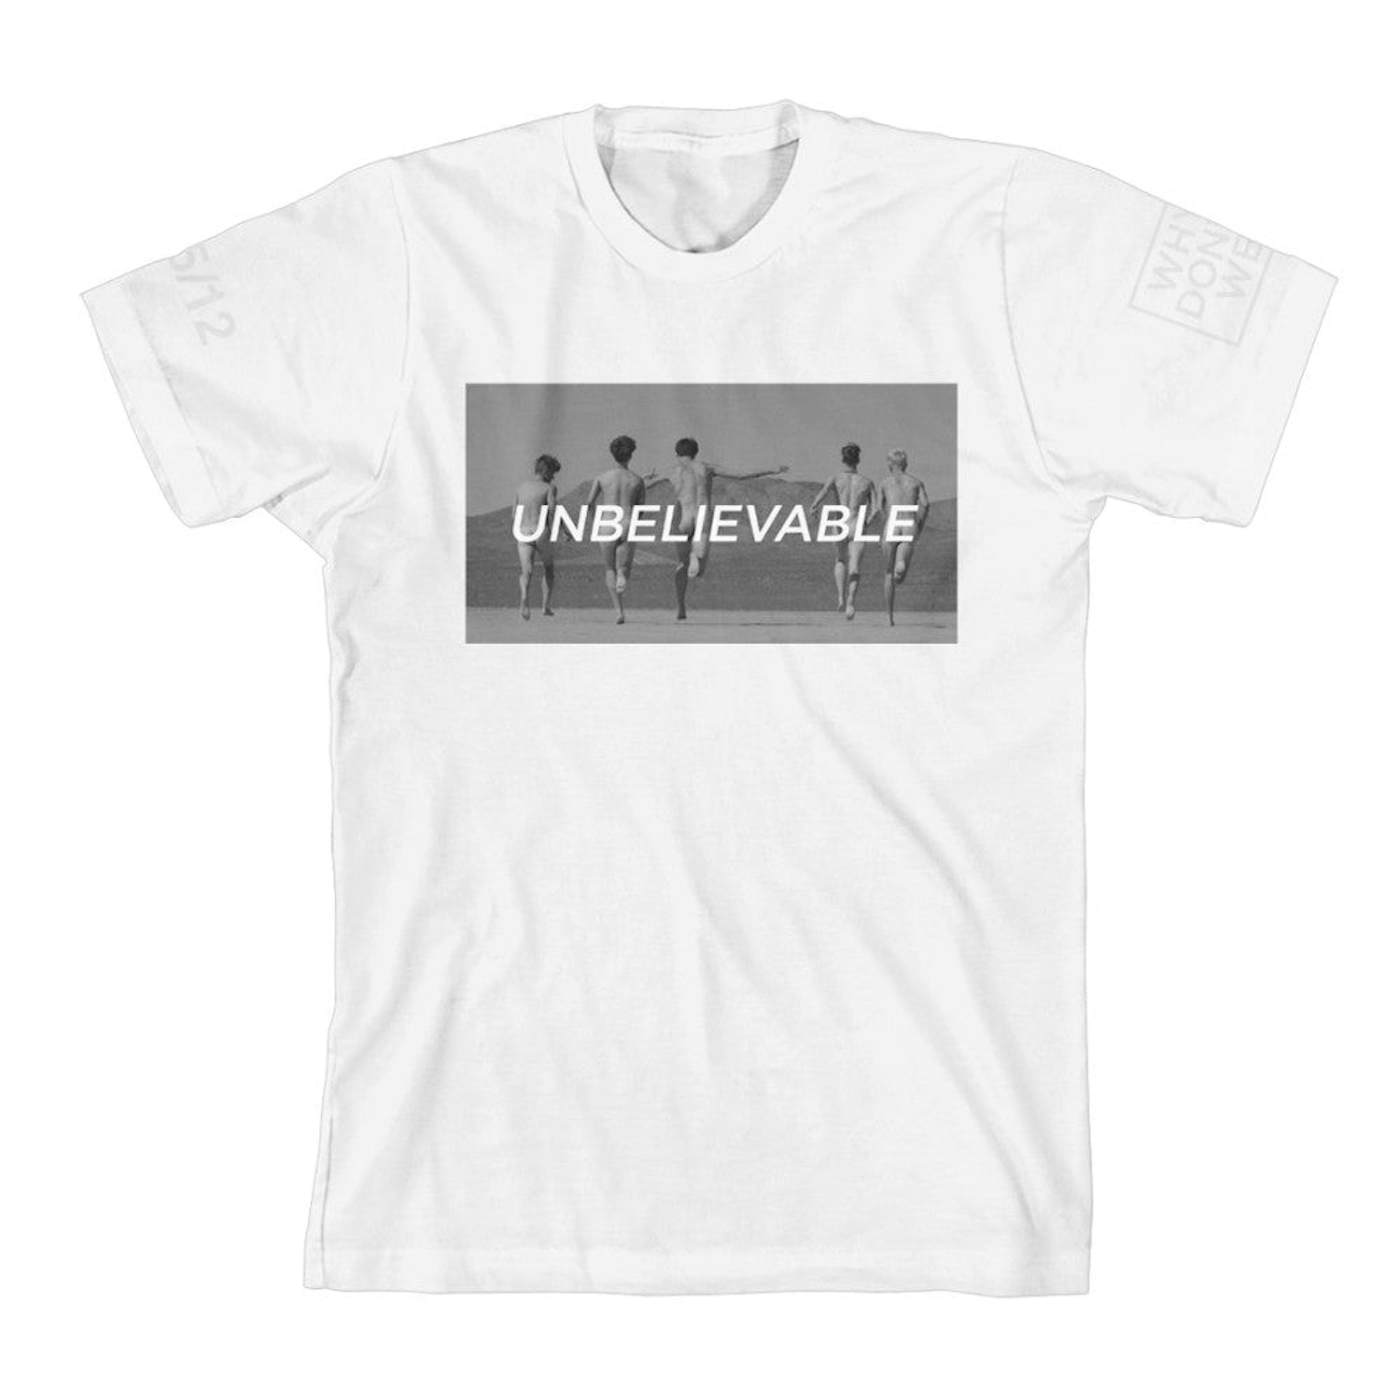 Why Don't We Unbelievable (White) T-Shirt